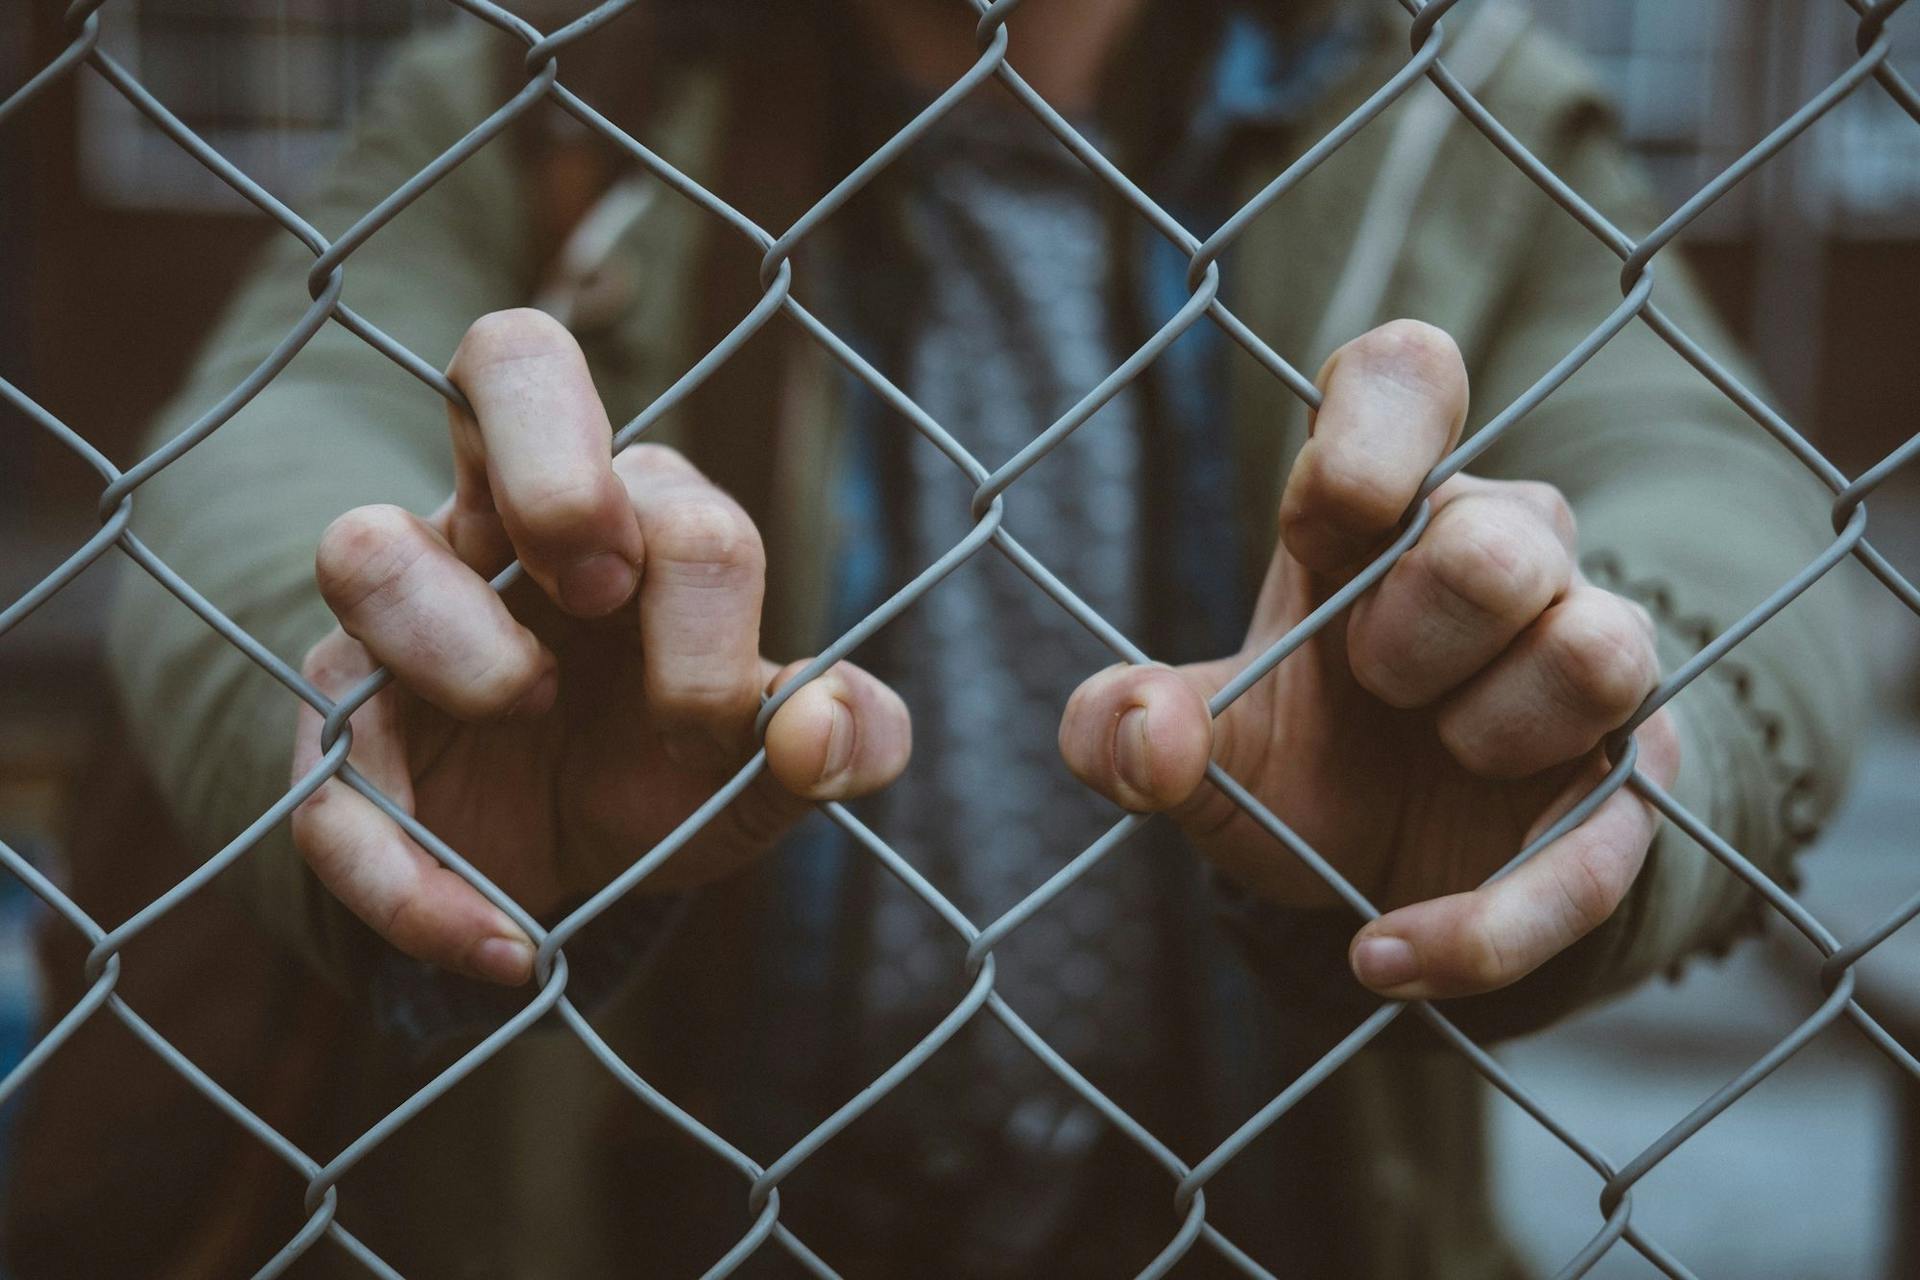 Self-Harm Rates in Youth Prisons Described as ‘Disturbing’